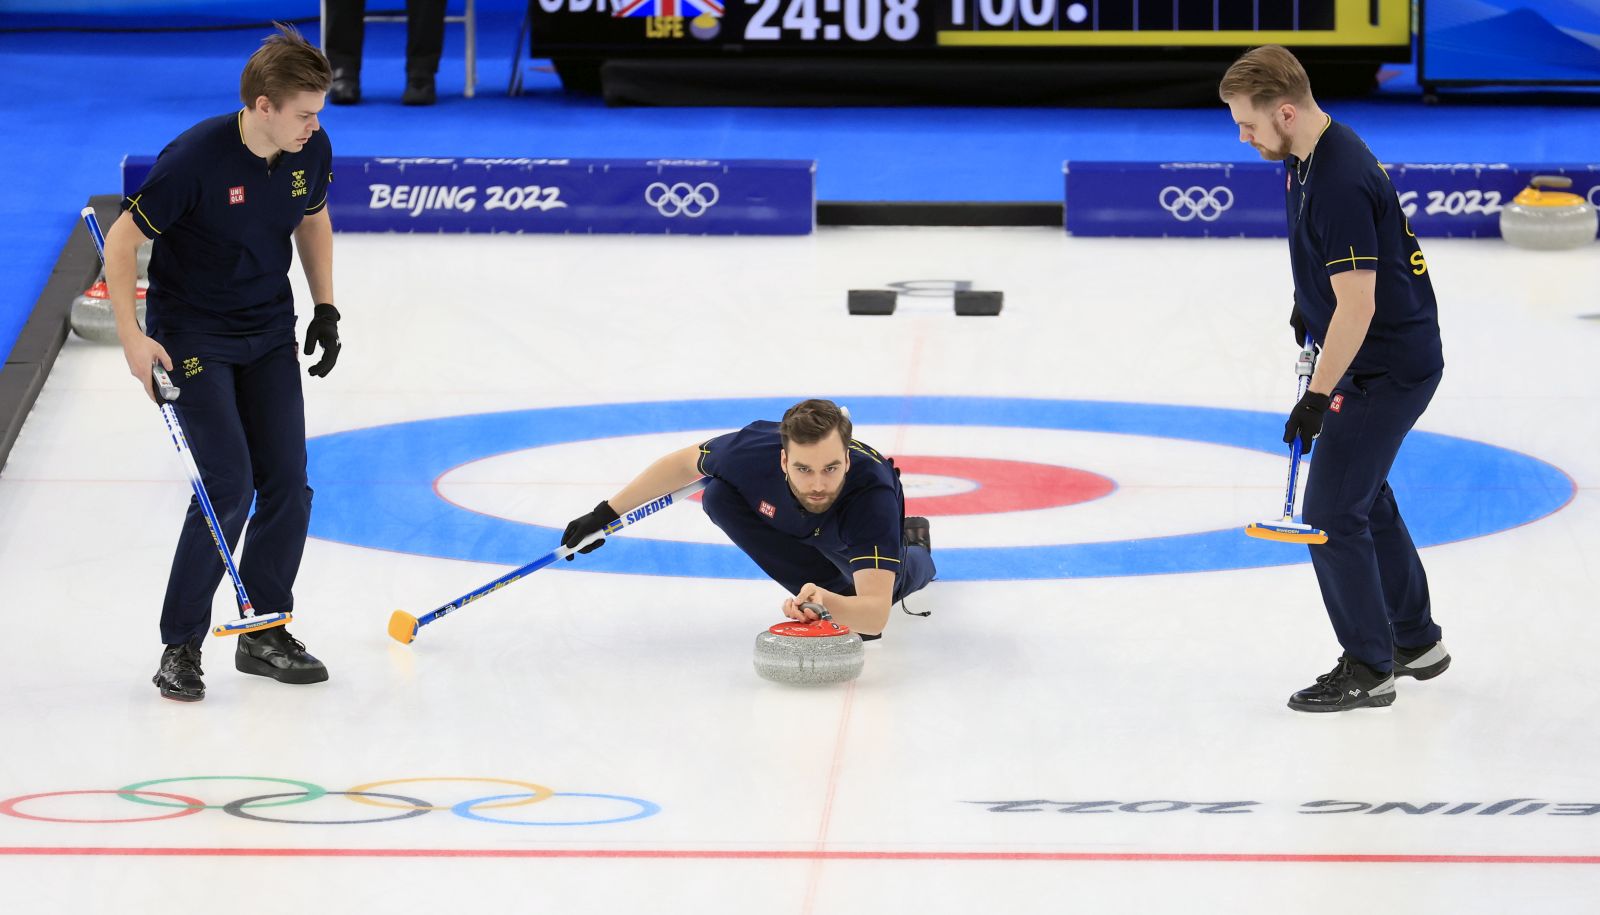 epa09770842 Oskar Eriksson of Sweden in action during Men's Curling gold medal match between Sweden and Great Britain at the Beijing 2022 Olympic Games, Beijing,  19 February 2022.  EPA/ALEX PLAVEVSKI